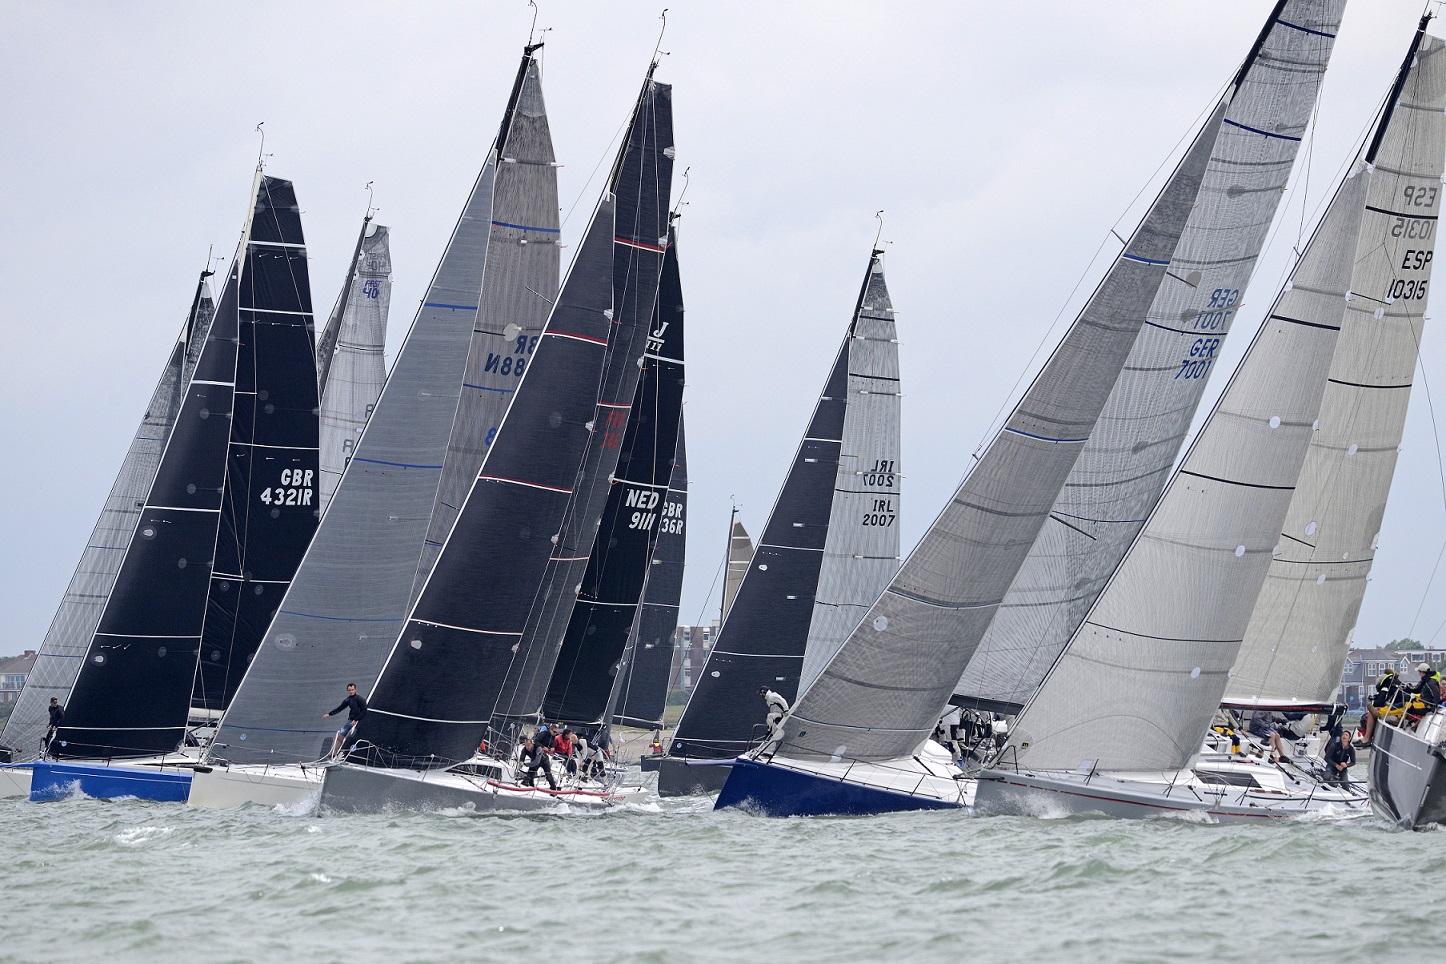 The fleet from day 3 of the 2016 IRC National Championships © Rick Tomlinson